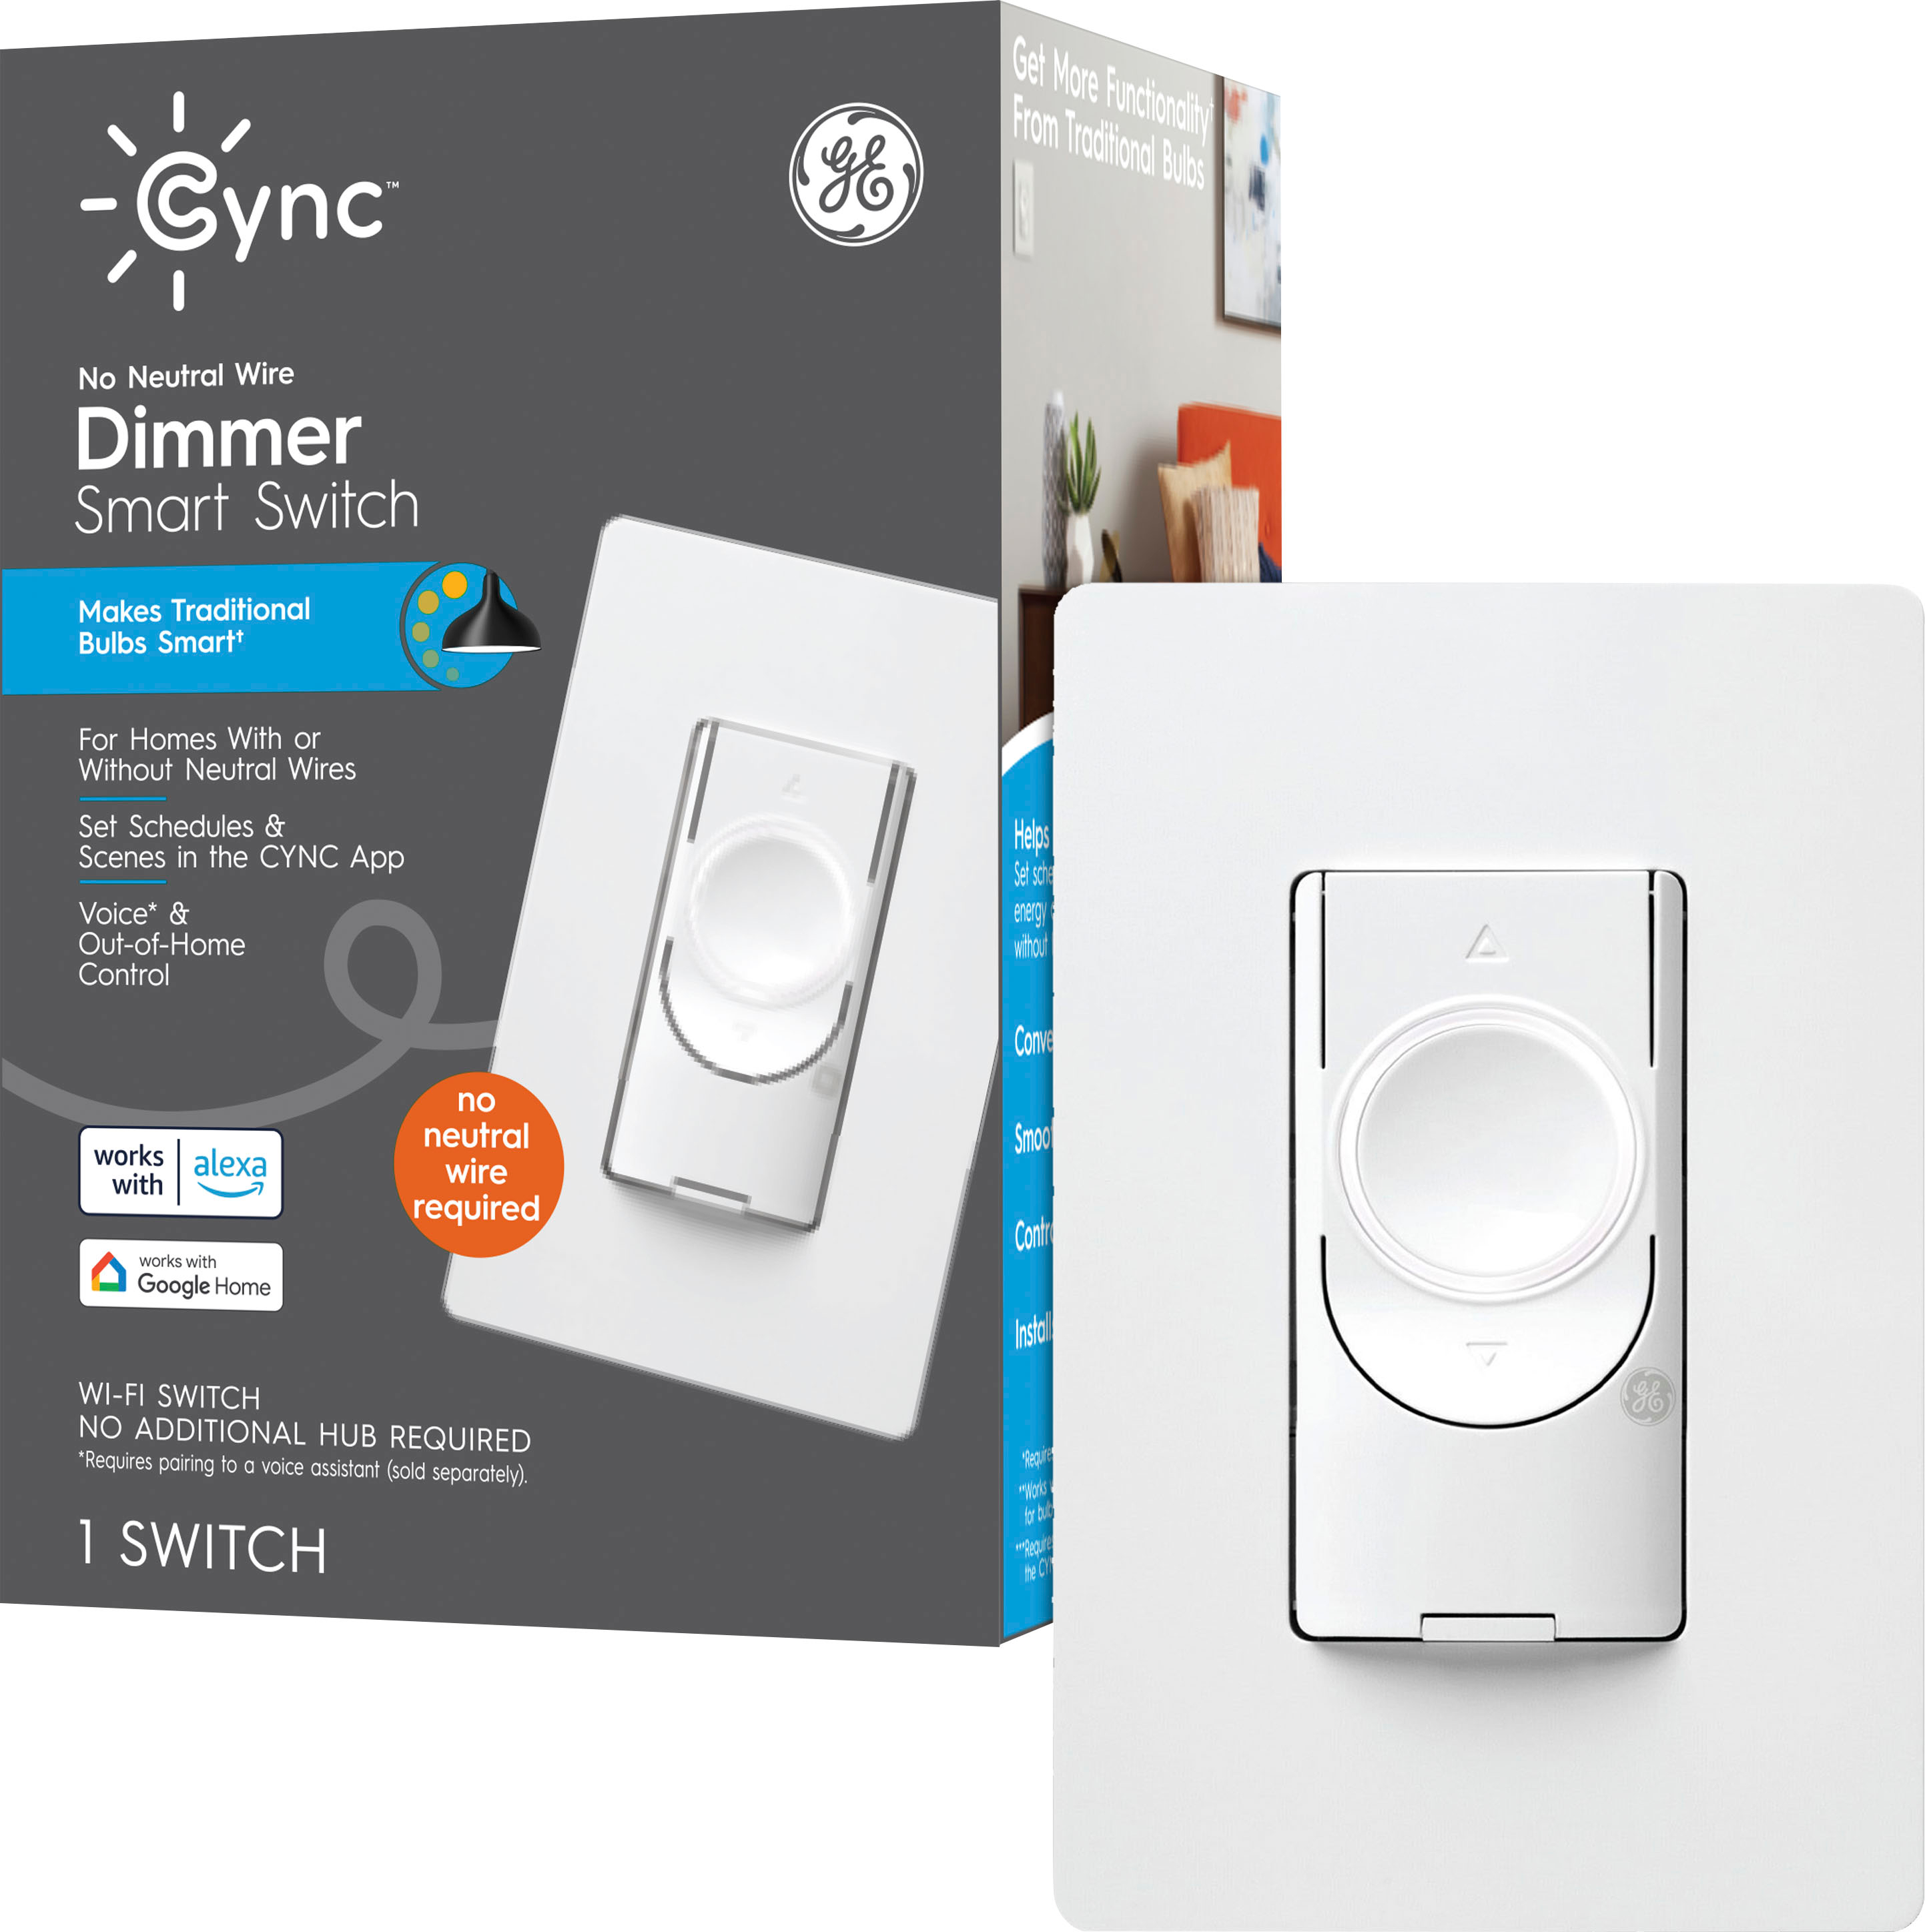 GE - CYNC Dimmer Smart Switch, No Neutral Wire Required, Bluetooth and 2.4GHz Wifi (Packing May Vary) - White